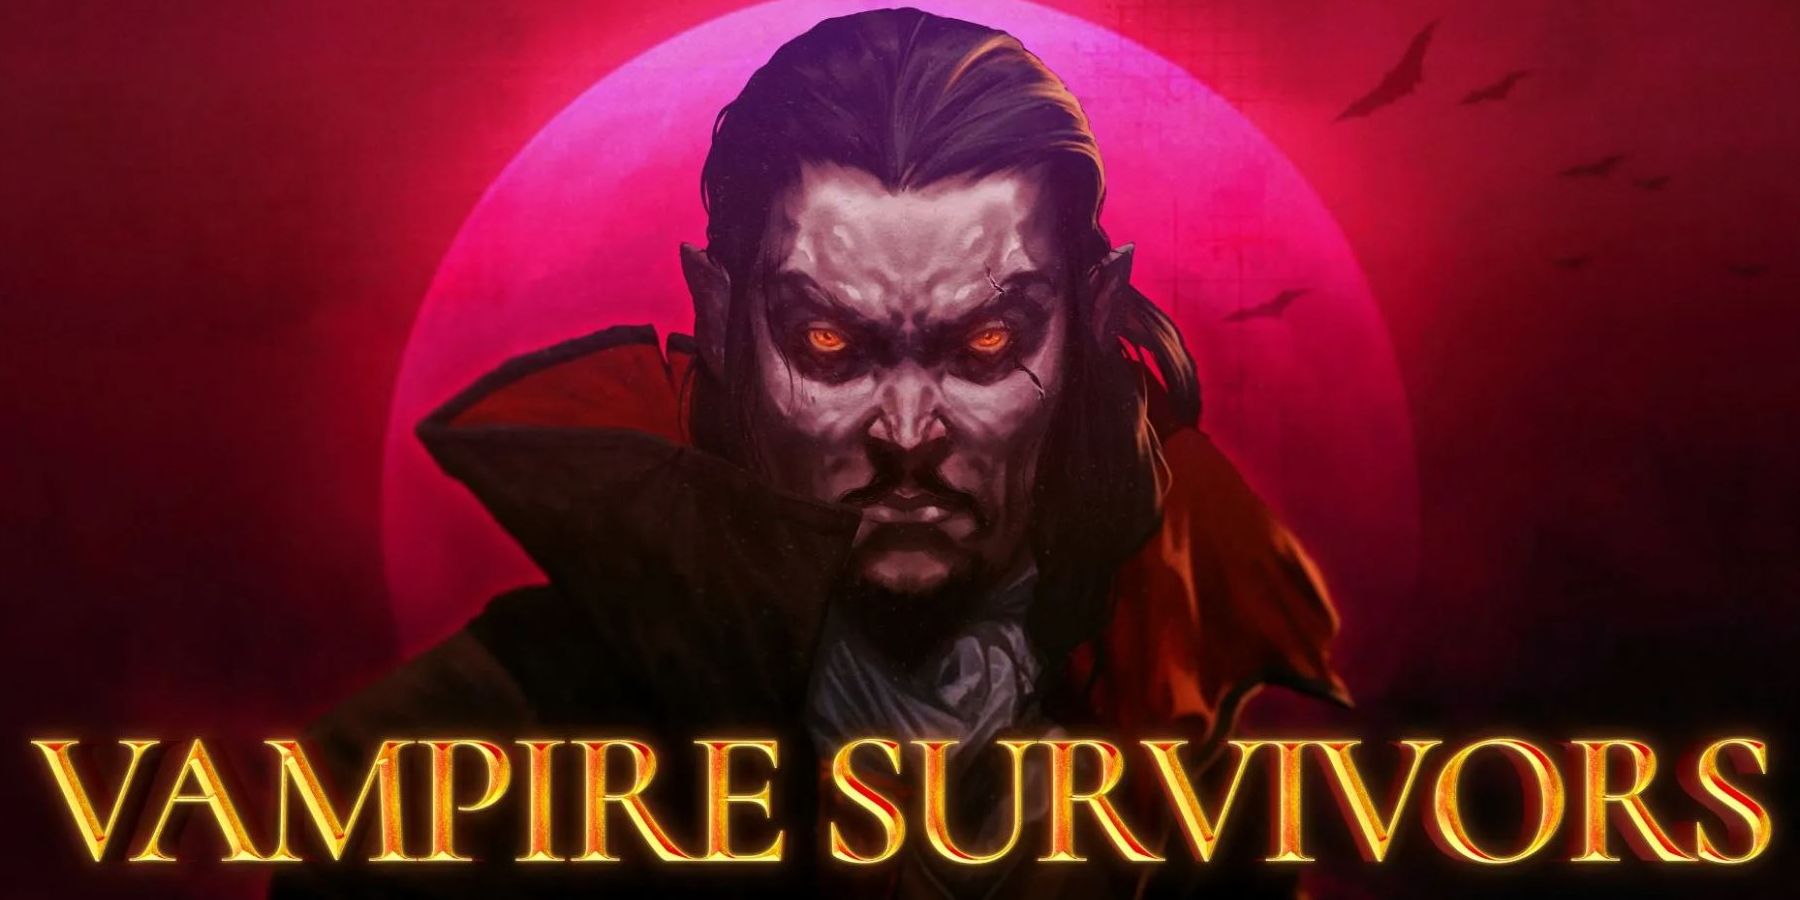 Vampire Survivors logo with a vampire in the center of a red background.